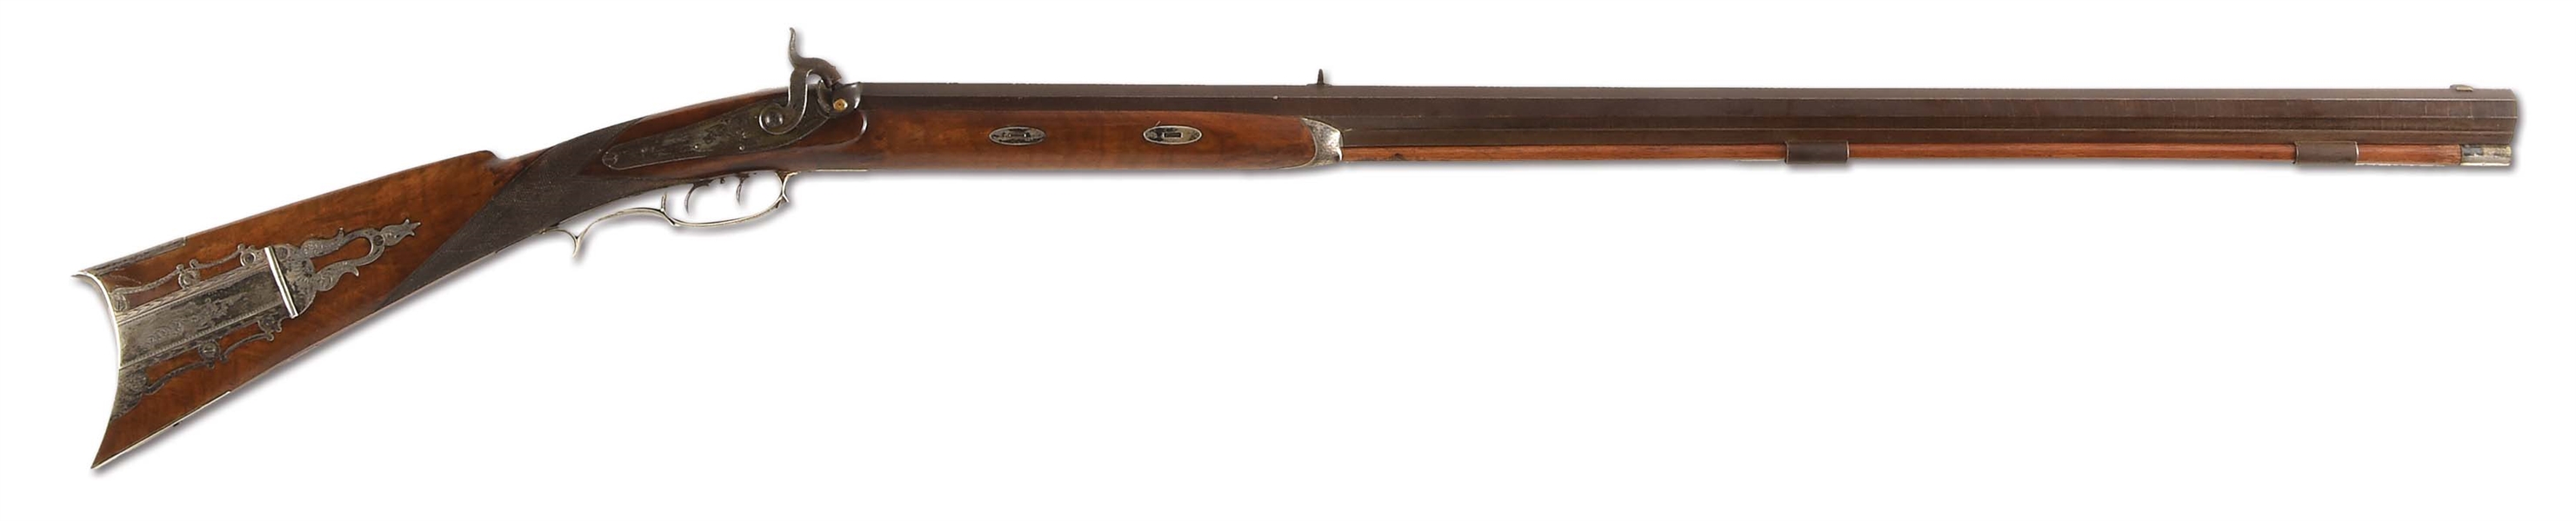 (A) RARE JOHN KRIDER HALF-STOCK PLAINS STYLE SILVER MOUNTED PERCUSSION SPORTING RIFLE.